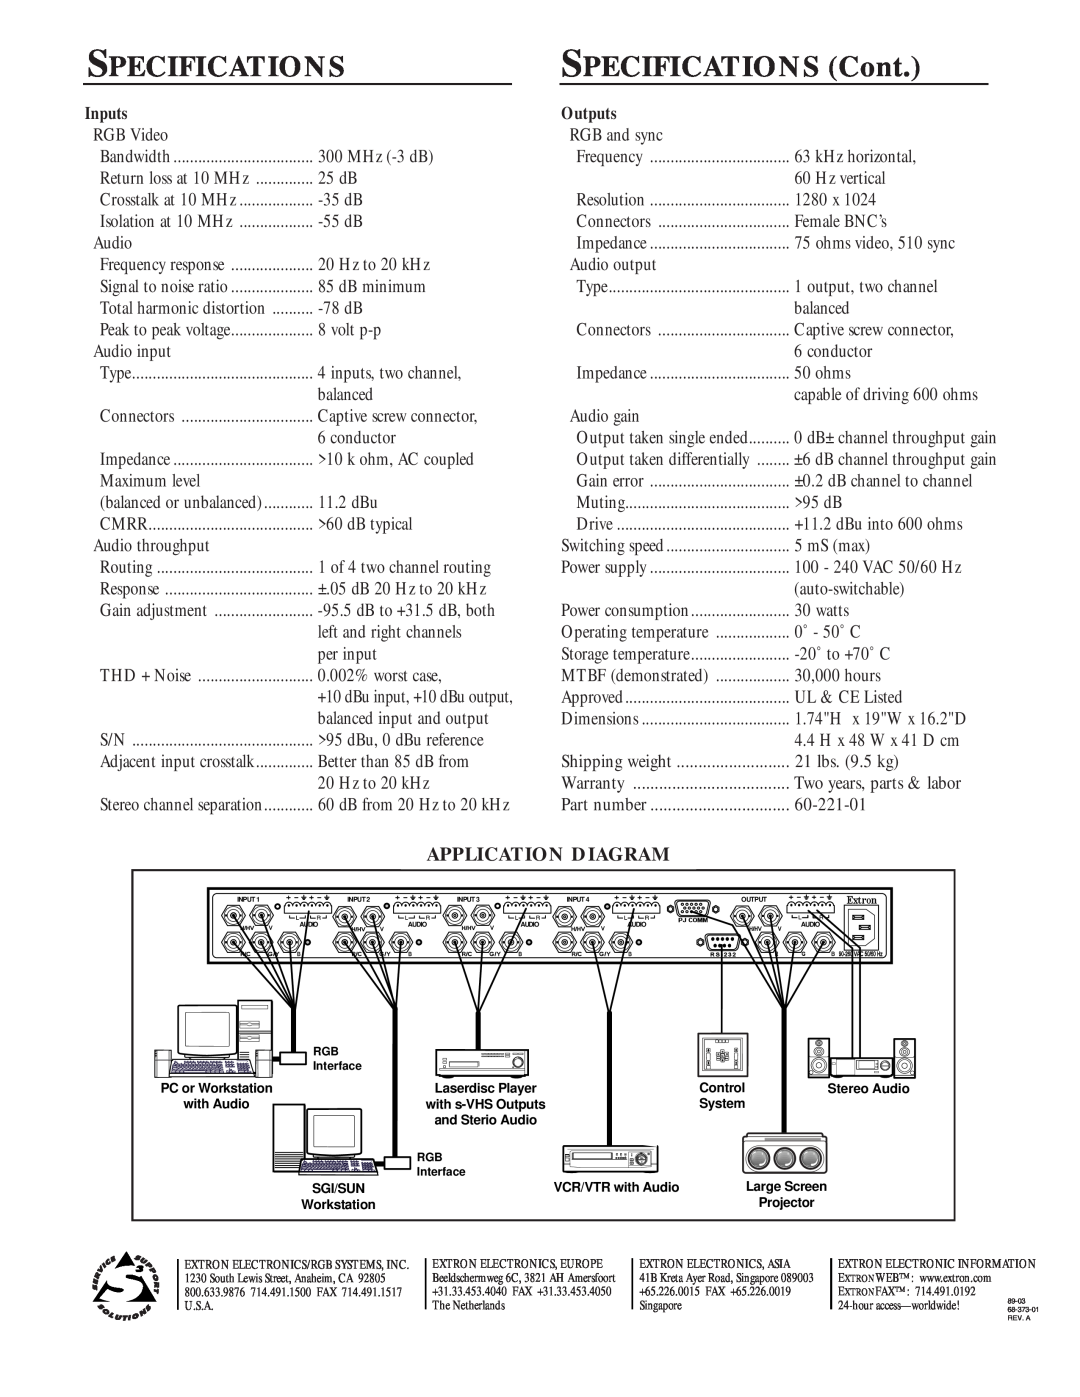 Extron electronic System 4LQ xi manual Specifications, SPECIFICATIONS Cont, Application Diagram 